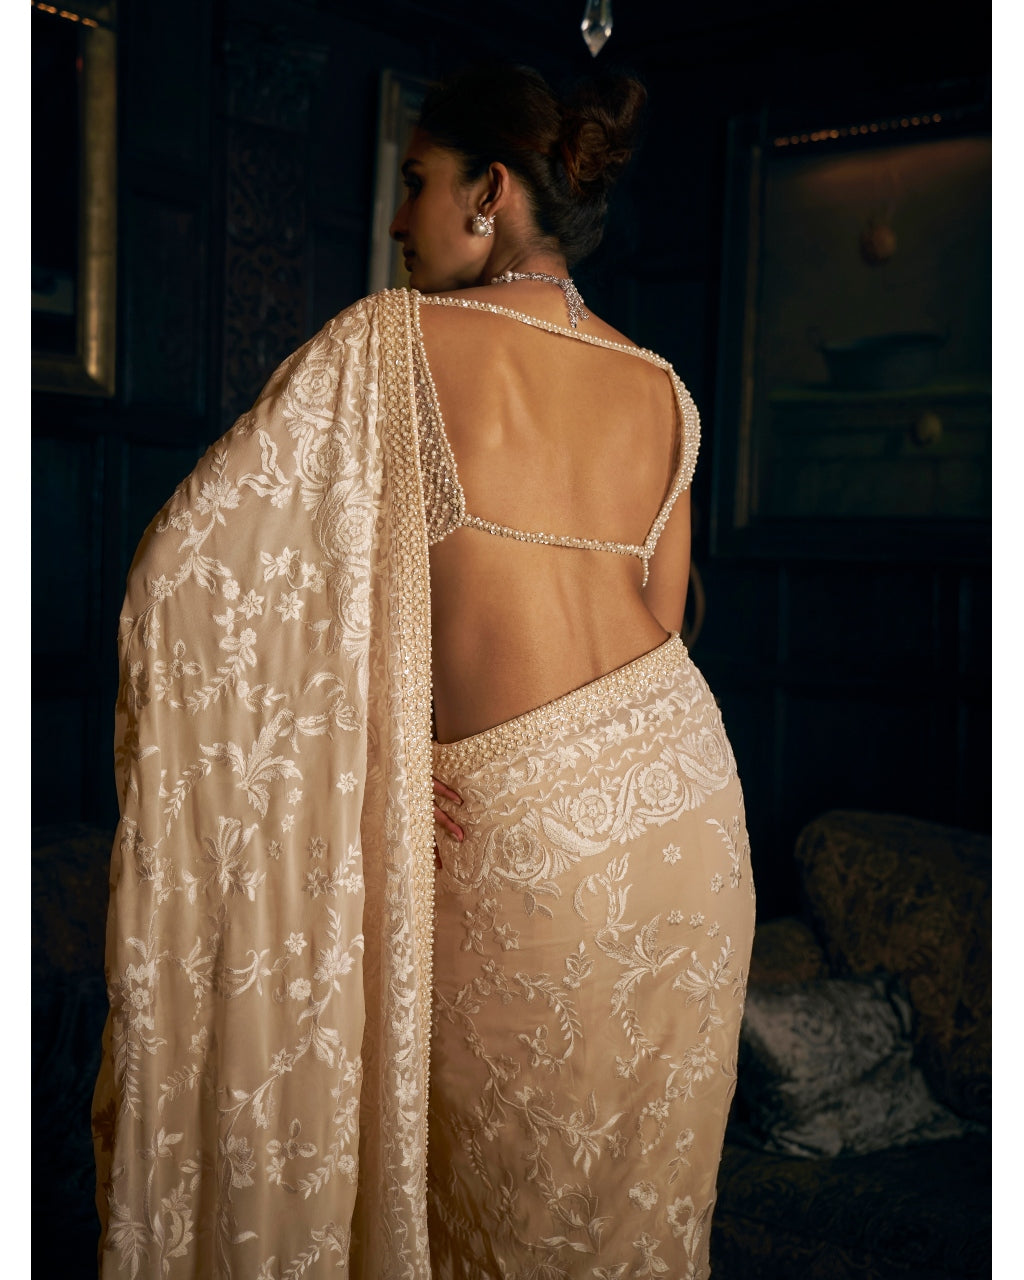 The most beautiful sari 😍 from seema gujraj via @KYNAH ! More to come